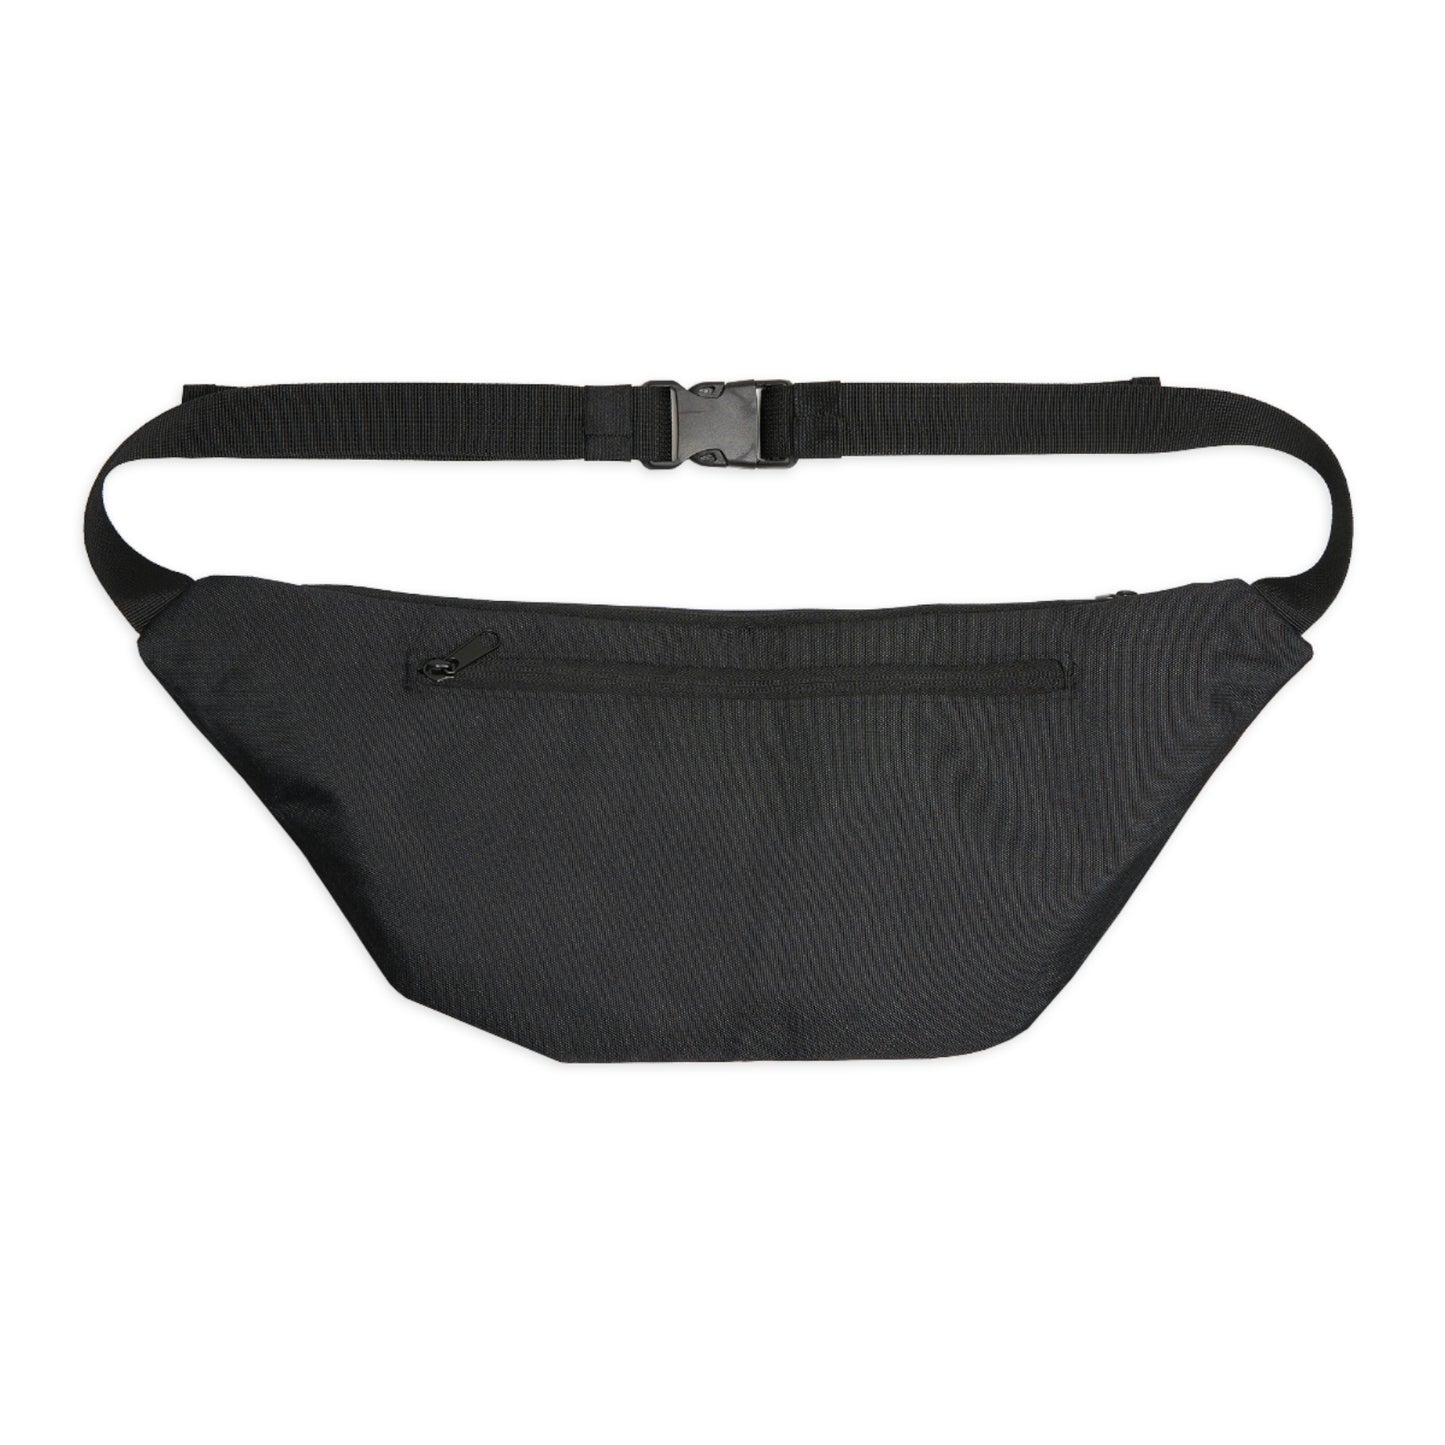 Mr. Ring–Large Fanny Pack